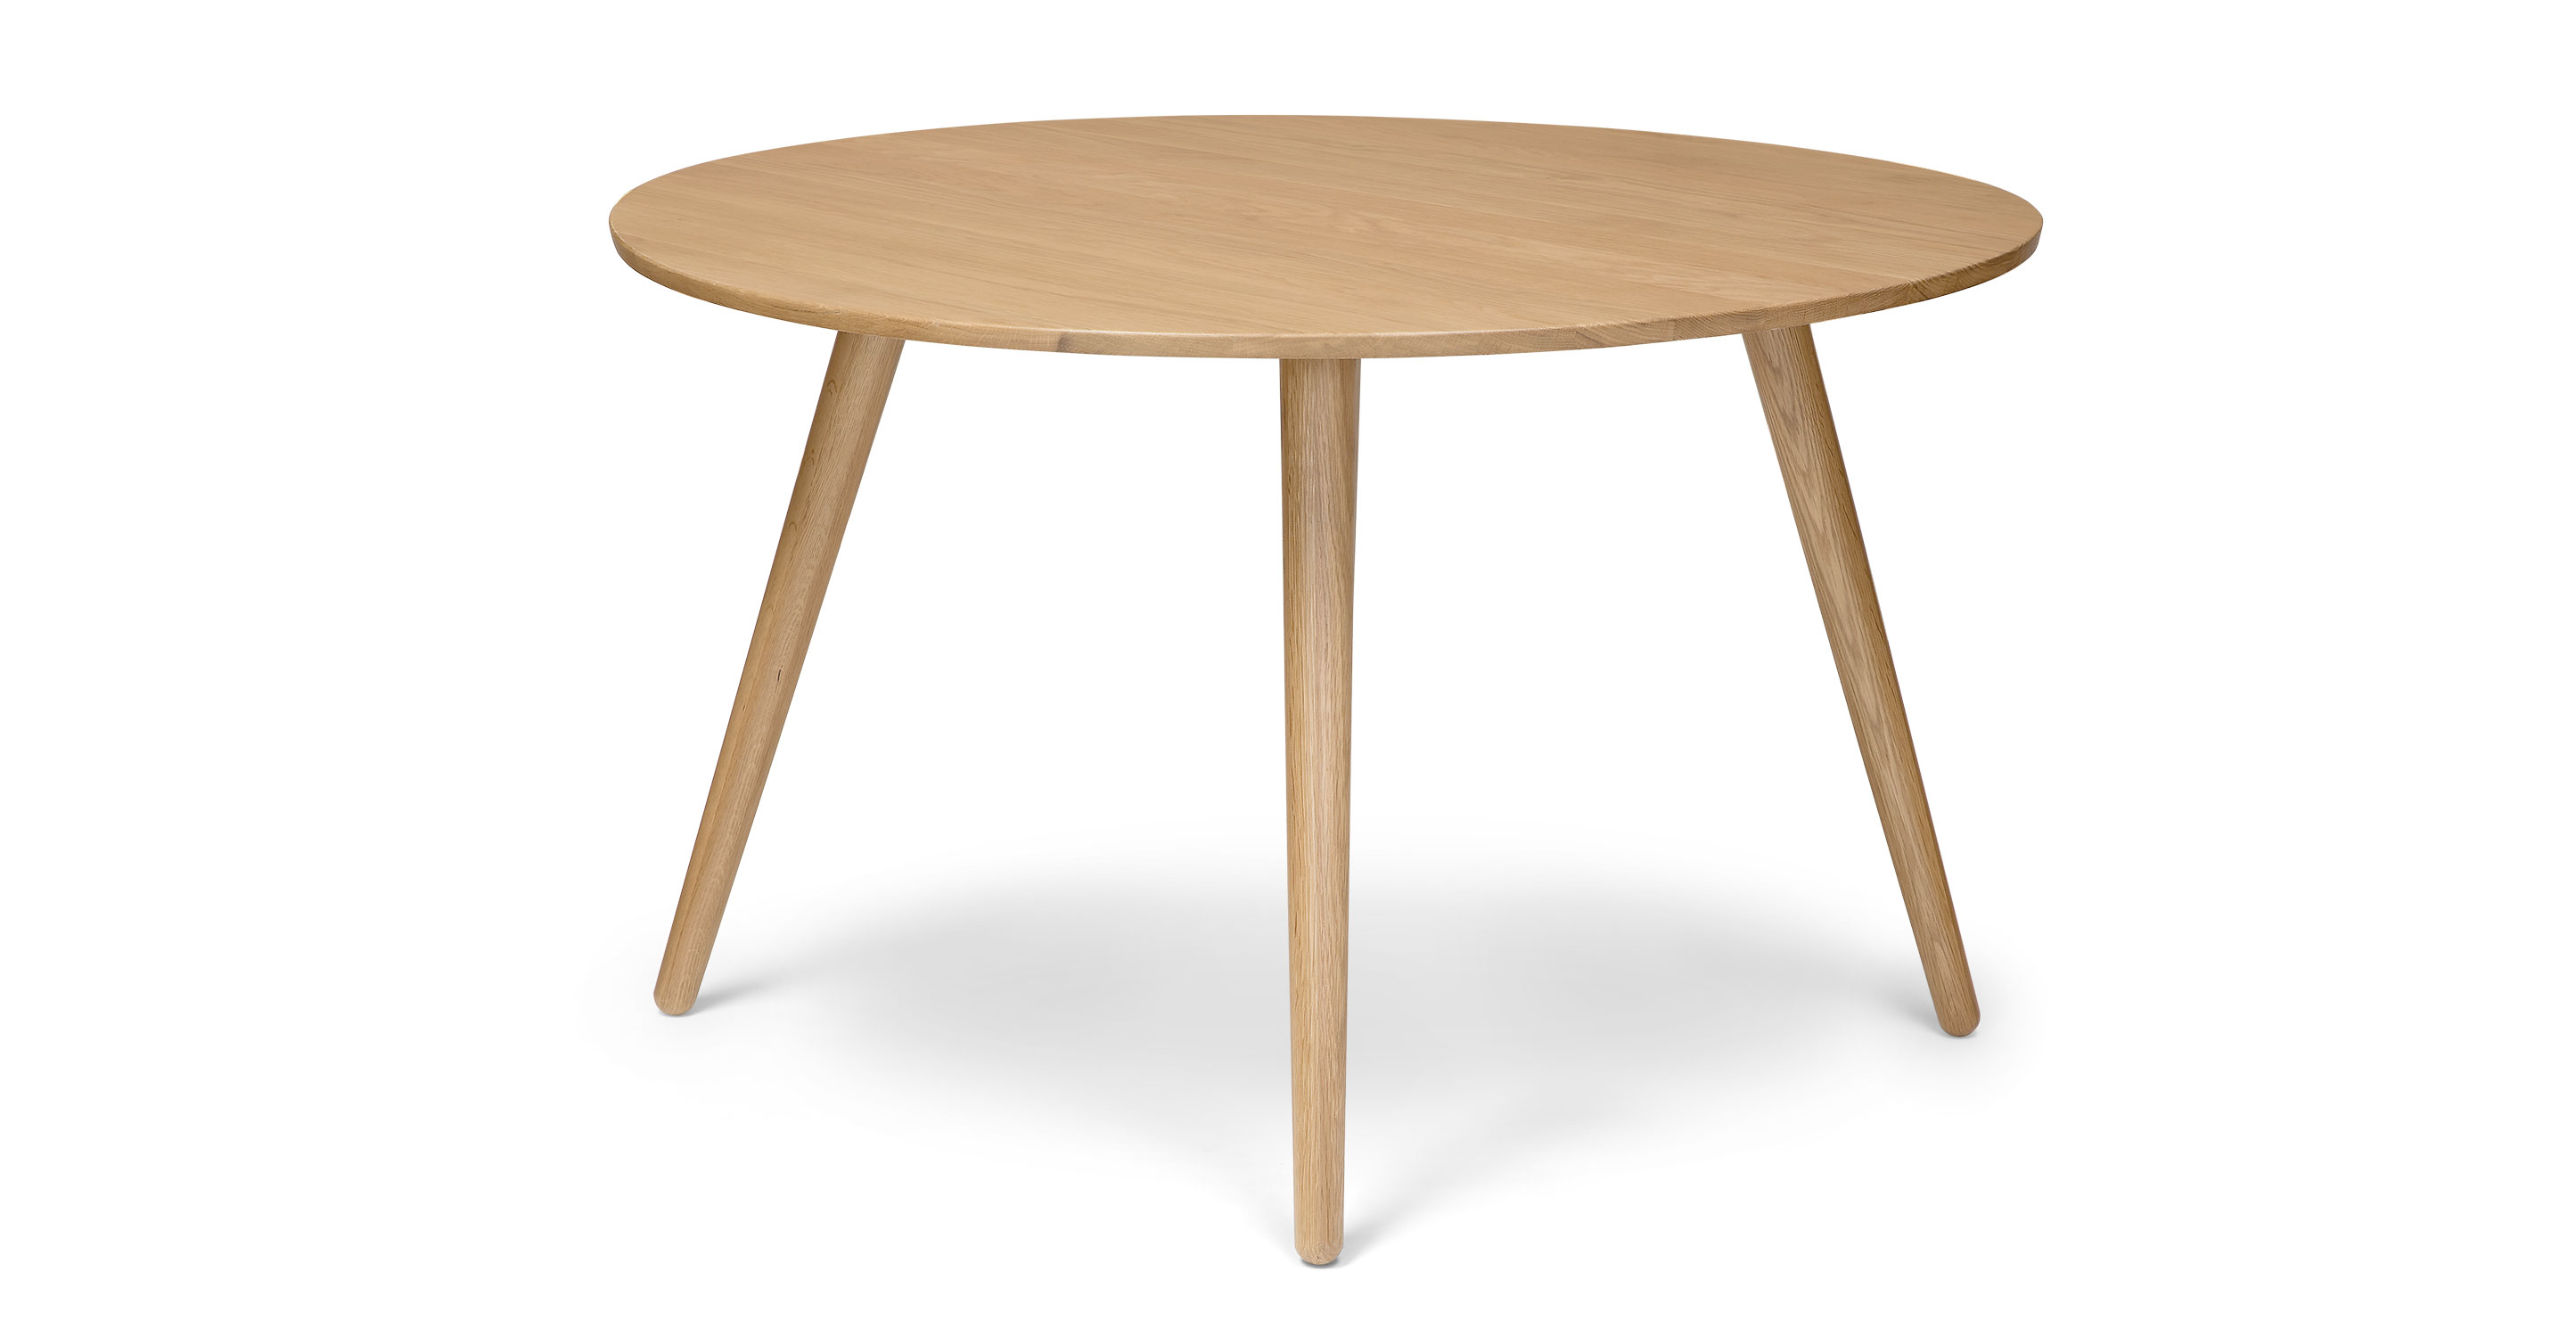 Round Oak Wood Dining Table For 4, Oak Round Dining Table Set